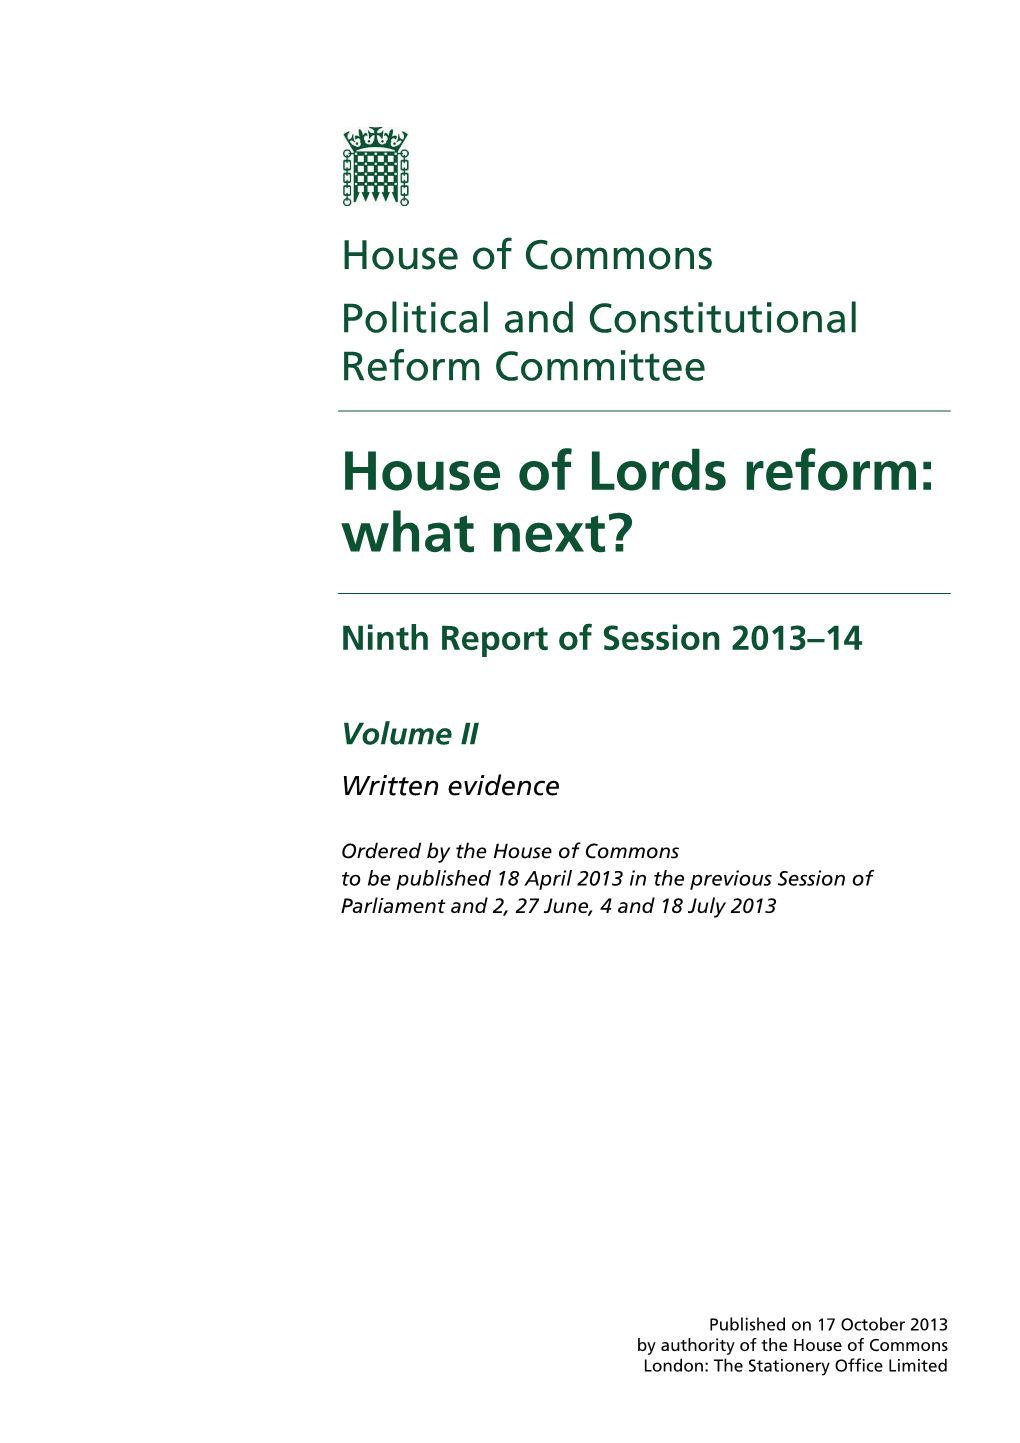 House of Lords Reform: What Next?